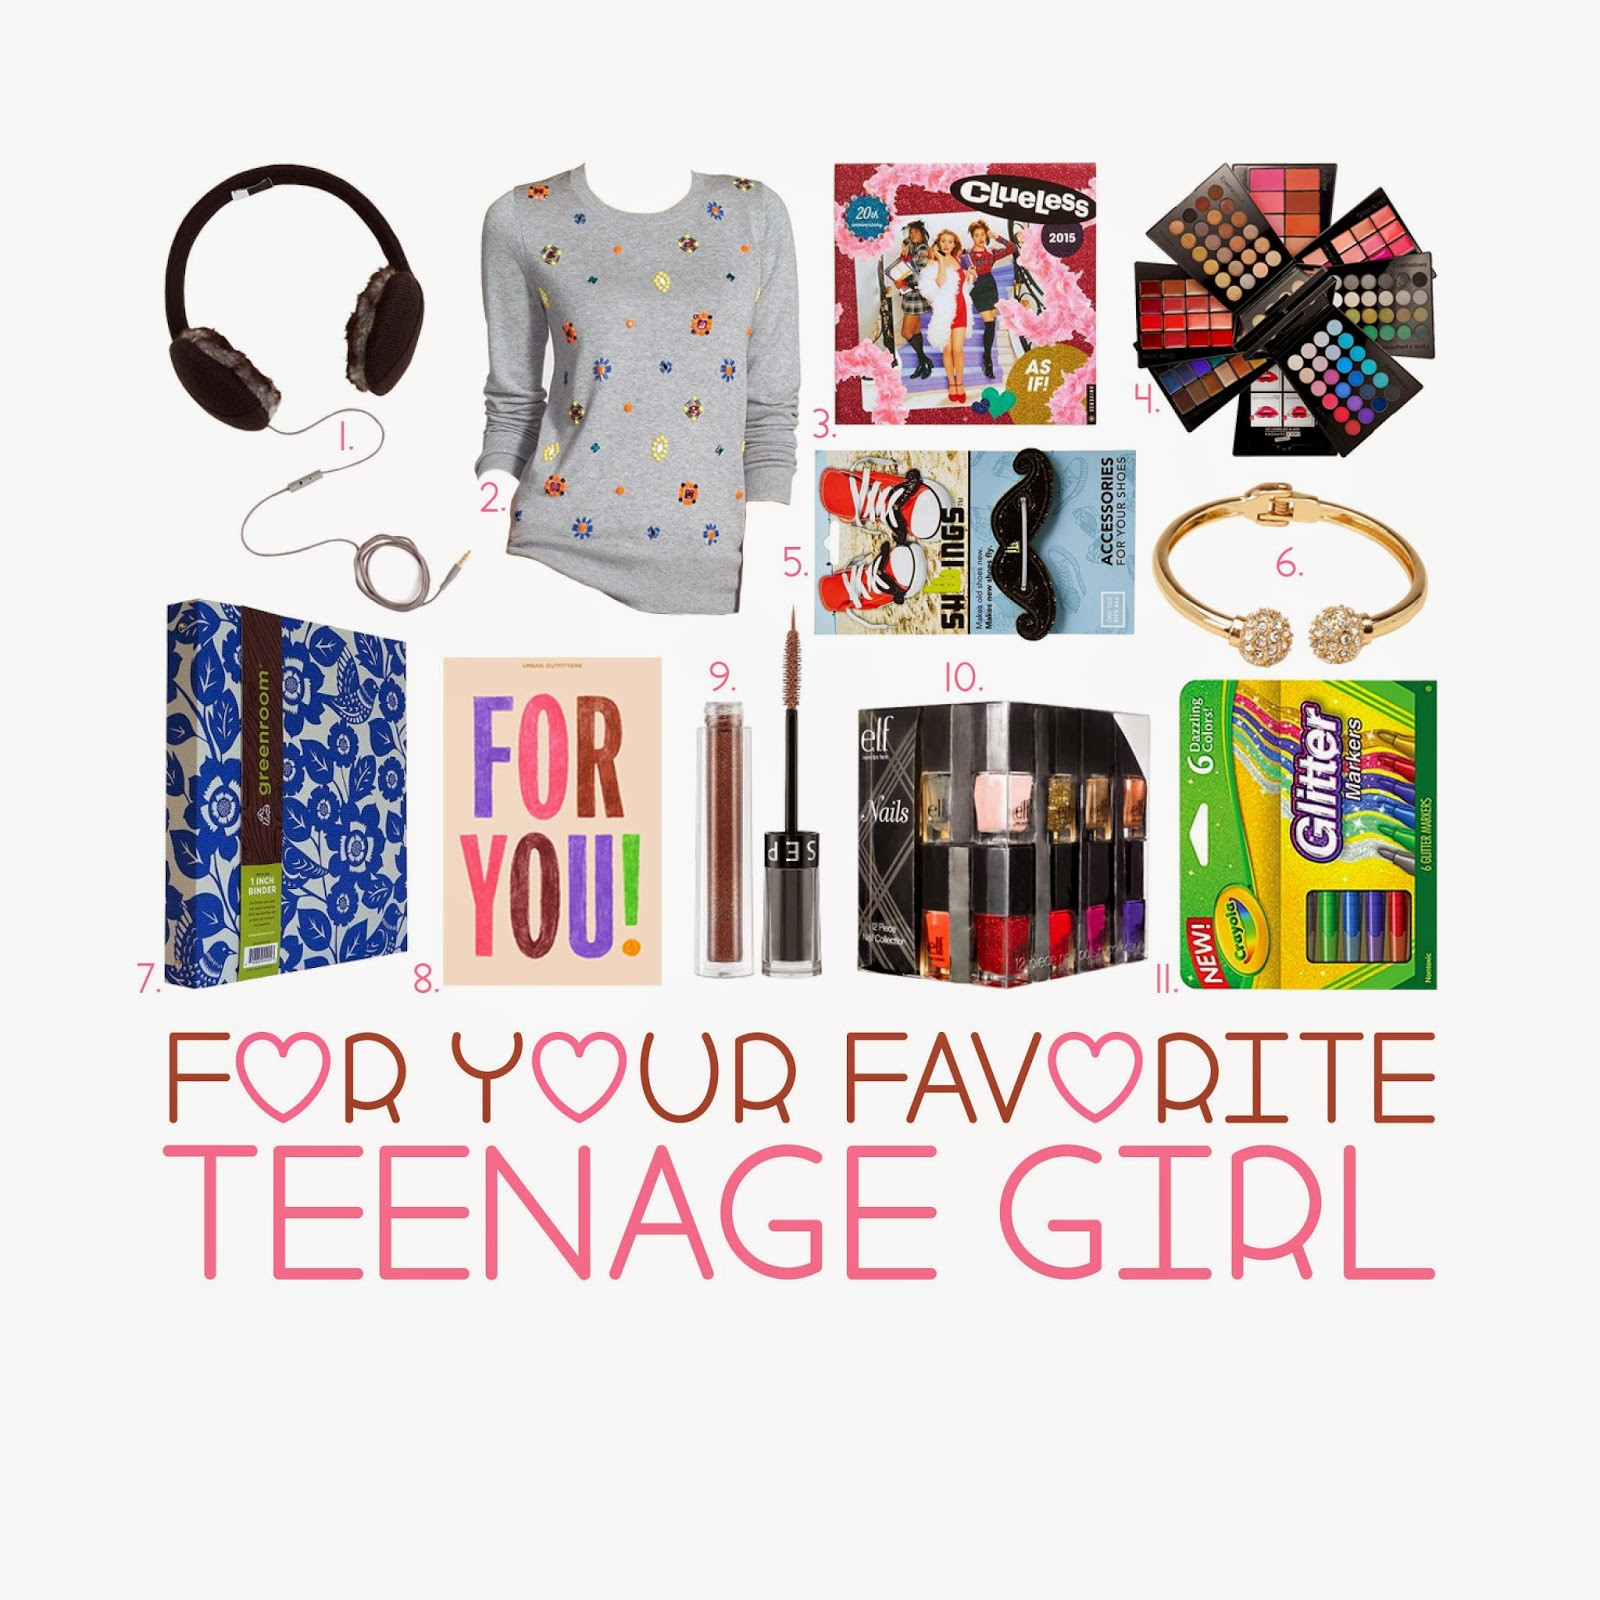 Gift Ideas For Teenage Girlfriend
 Gift Guide For Your Favorite Teen Girl